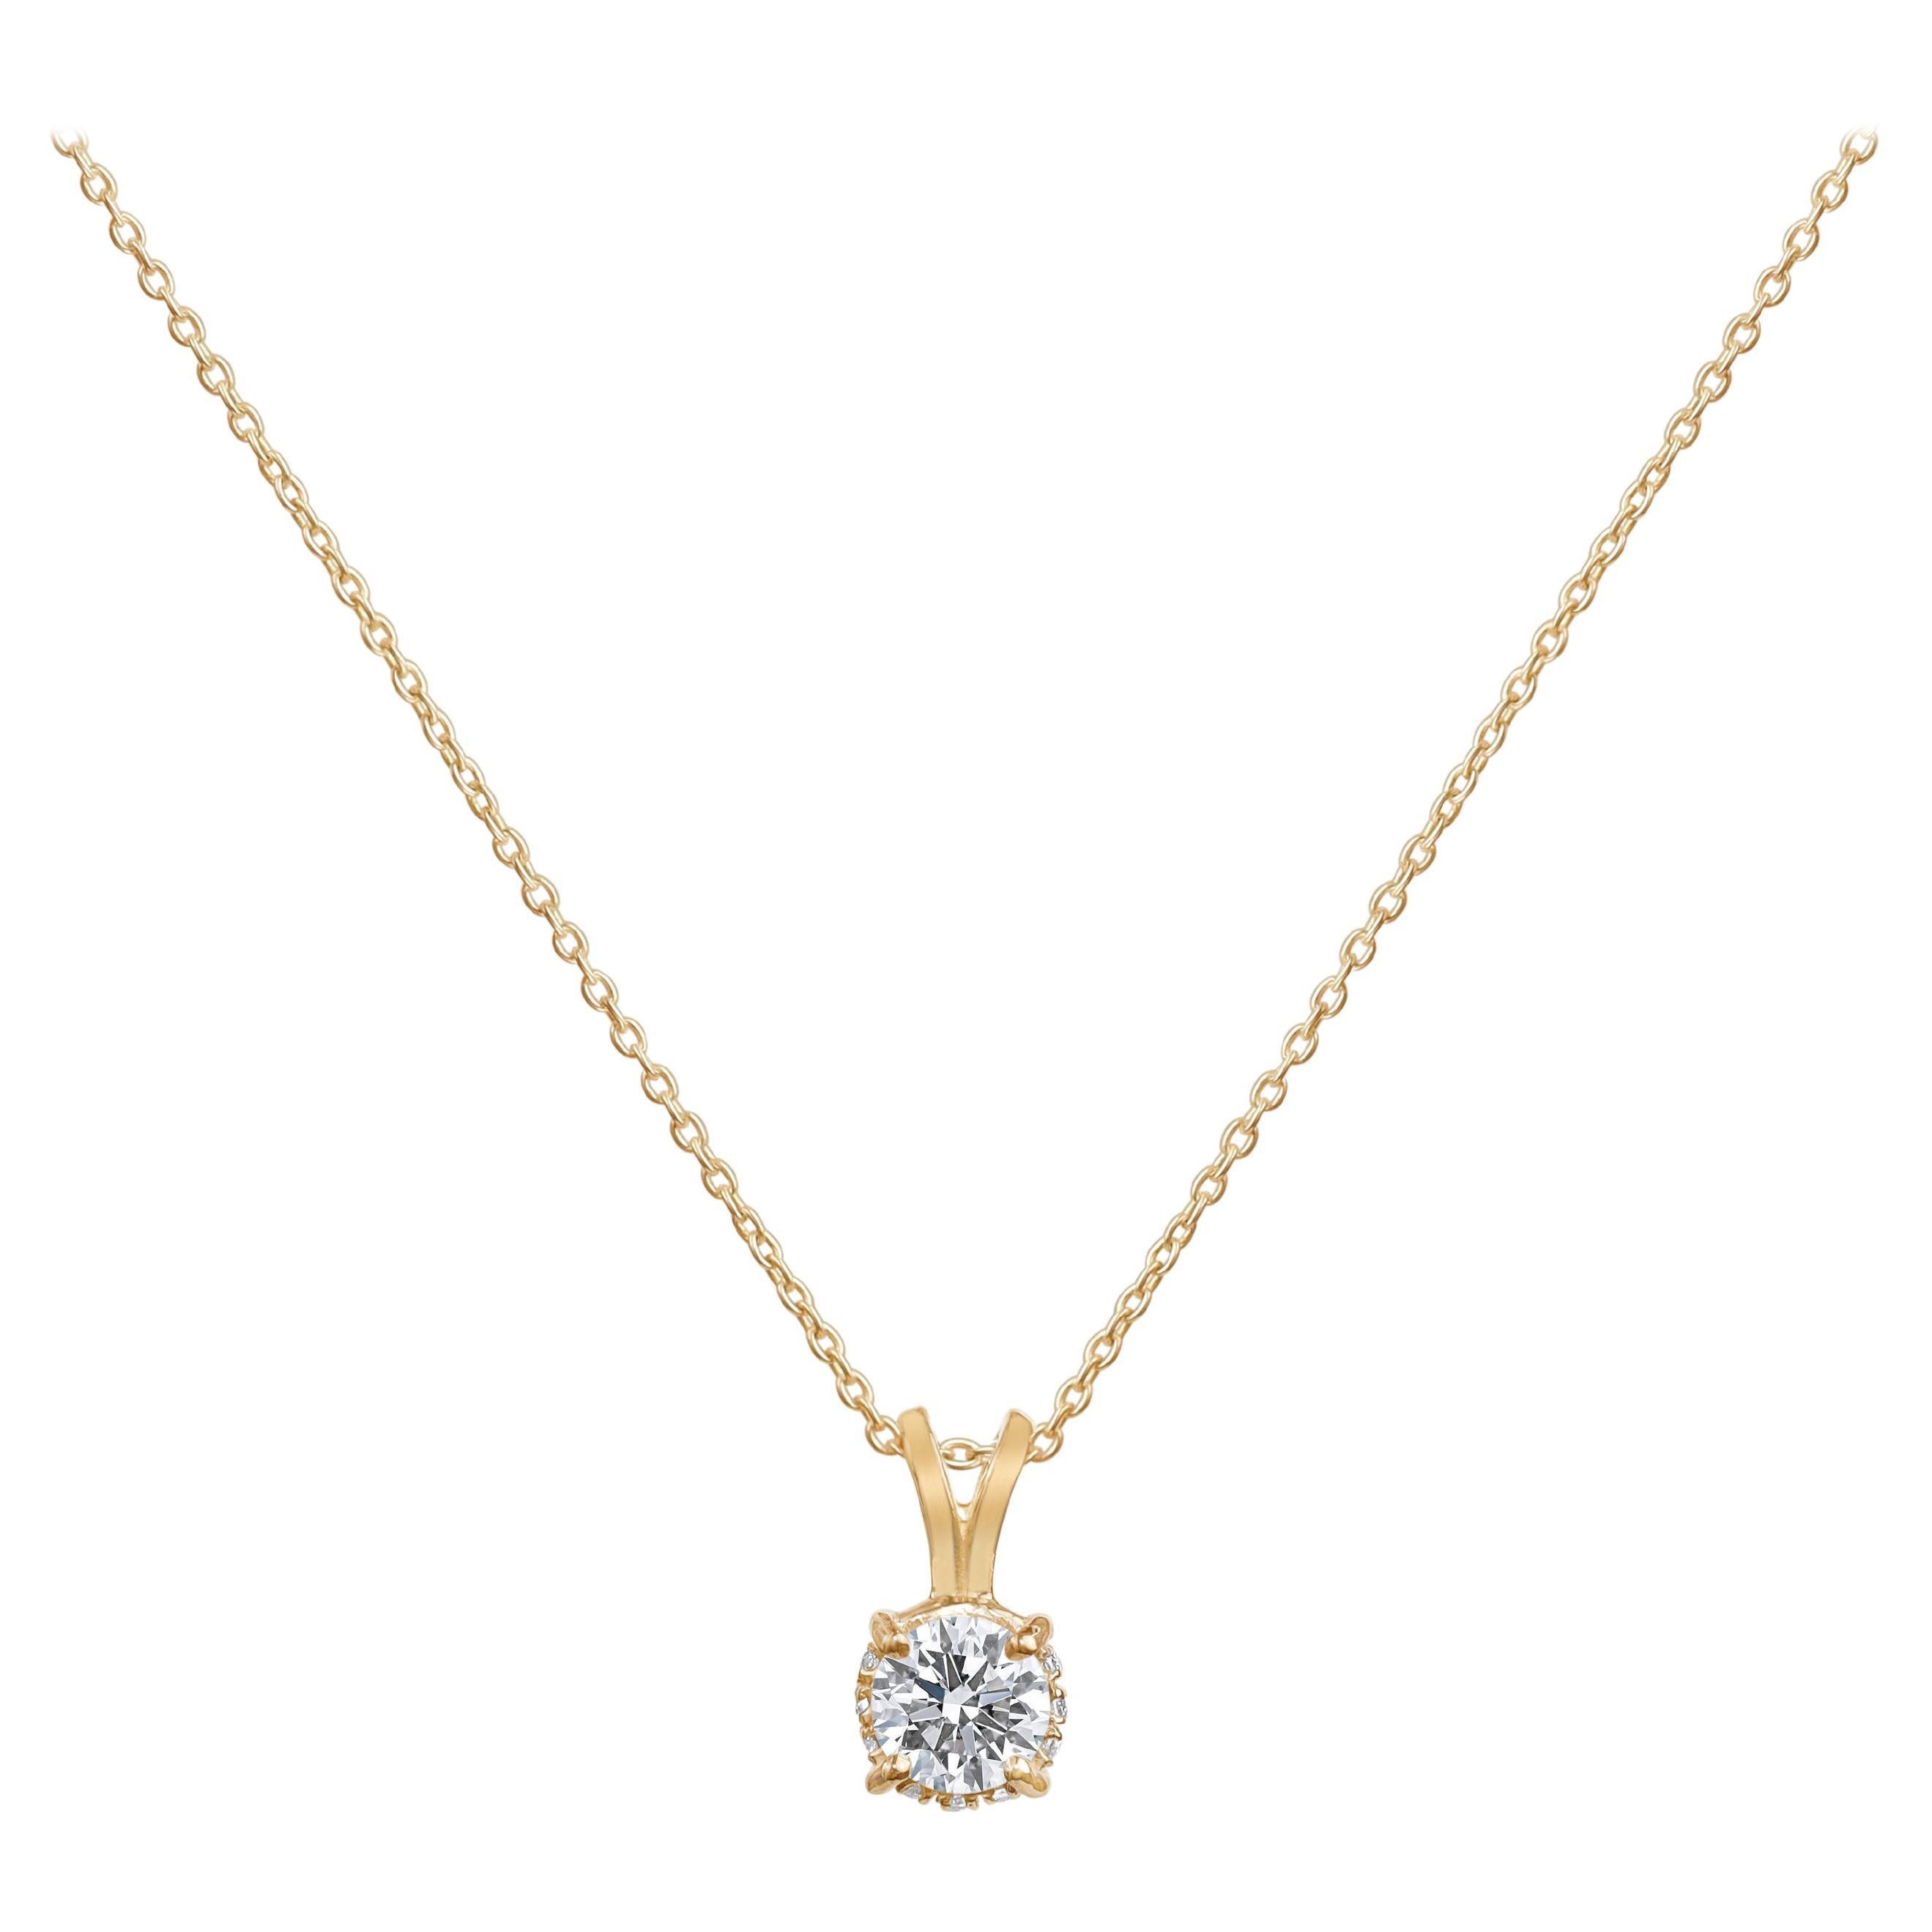 GIA Report Certified 2 Carat D Colorless IF Round Cut Diamond Pendant Necklace